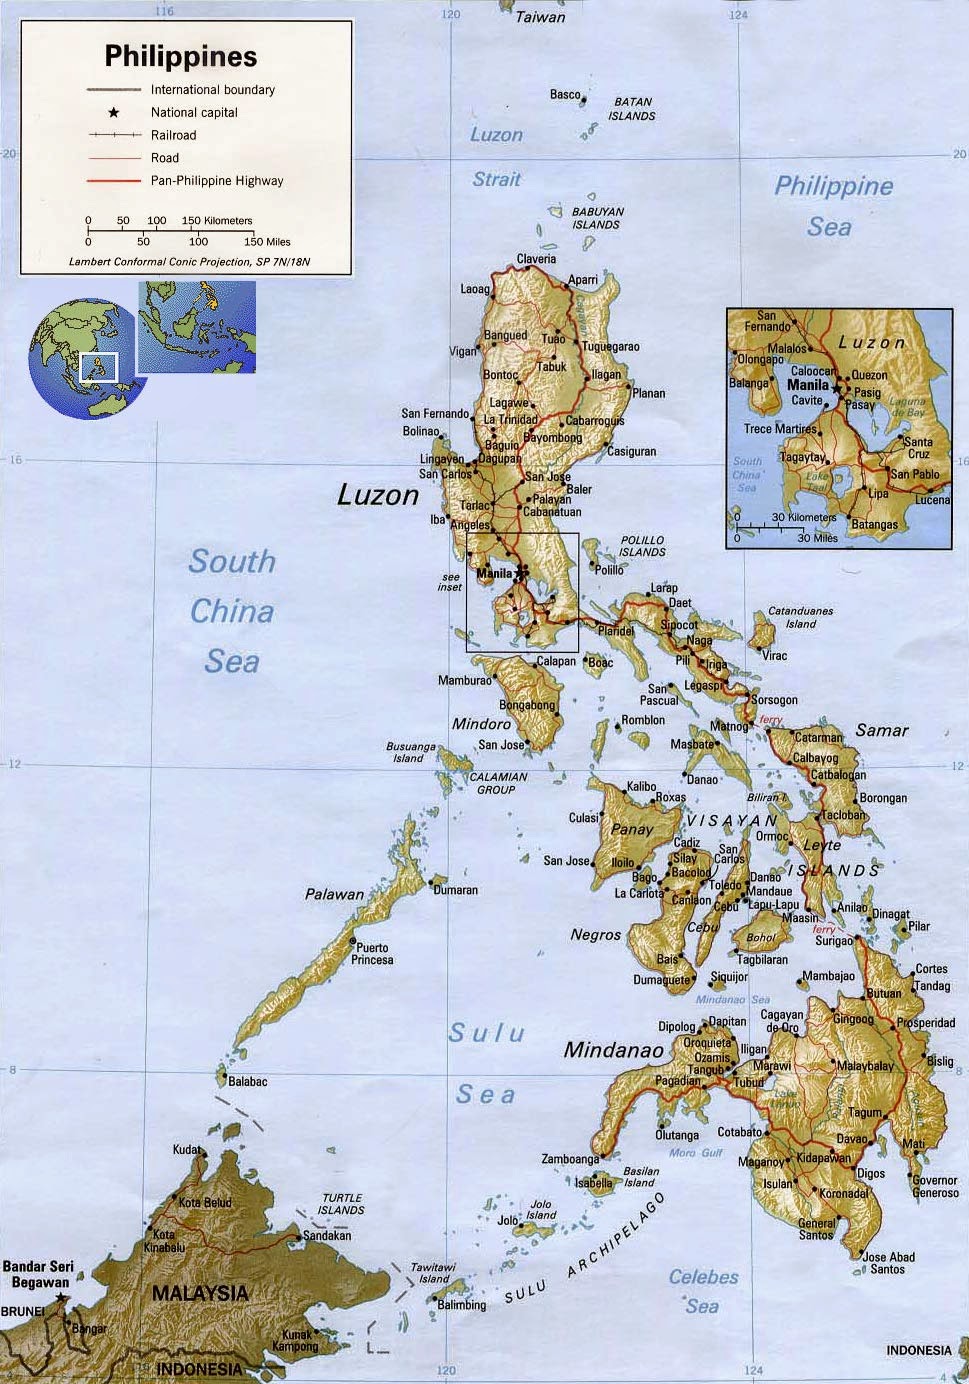 PHILIPPINES - GEOGRAPHICAL MAPS OF PHILIPPINES